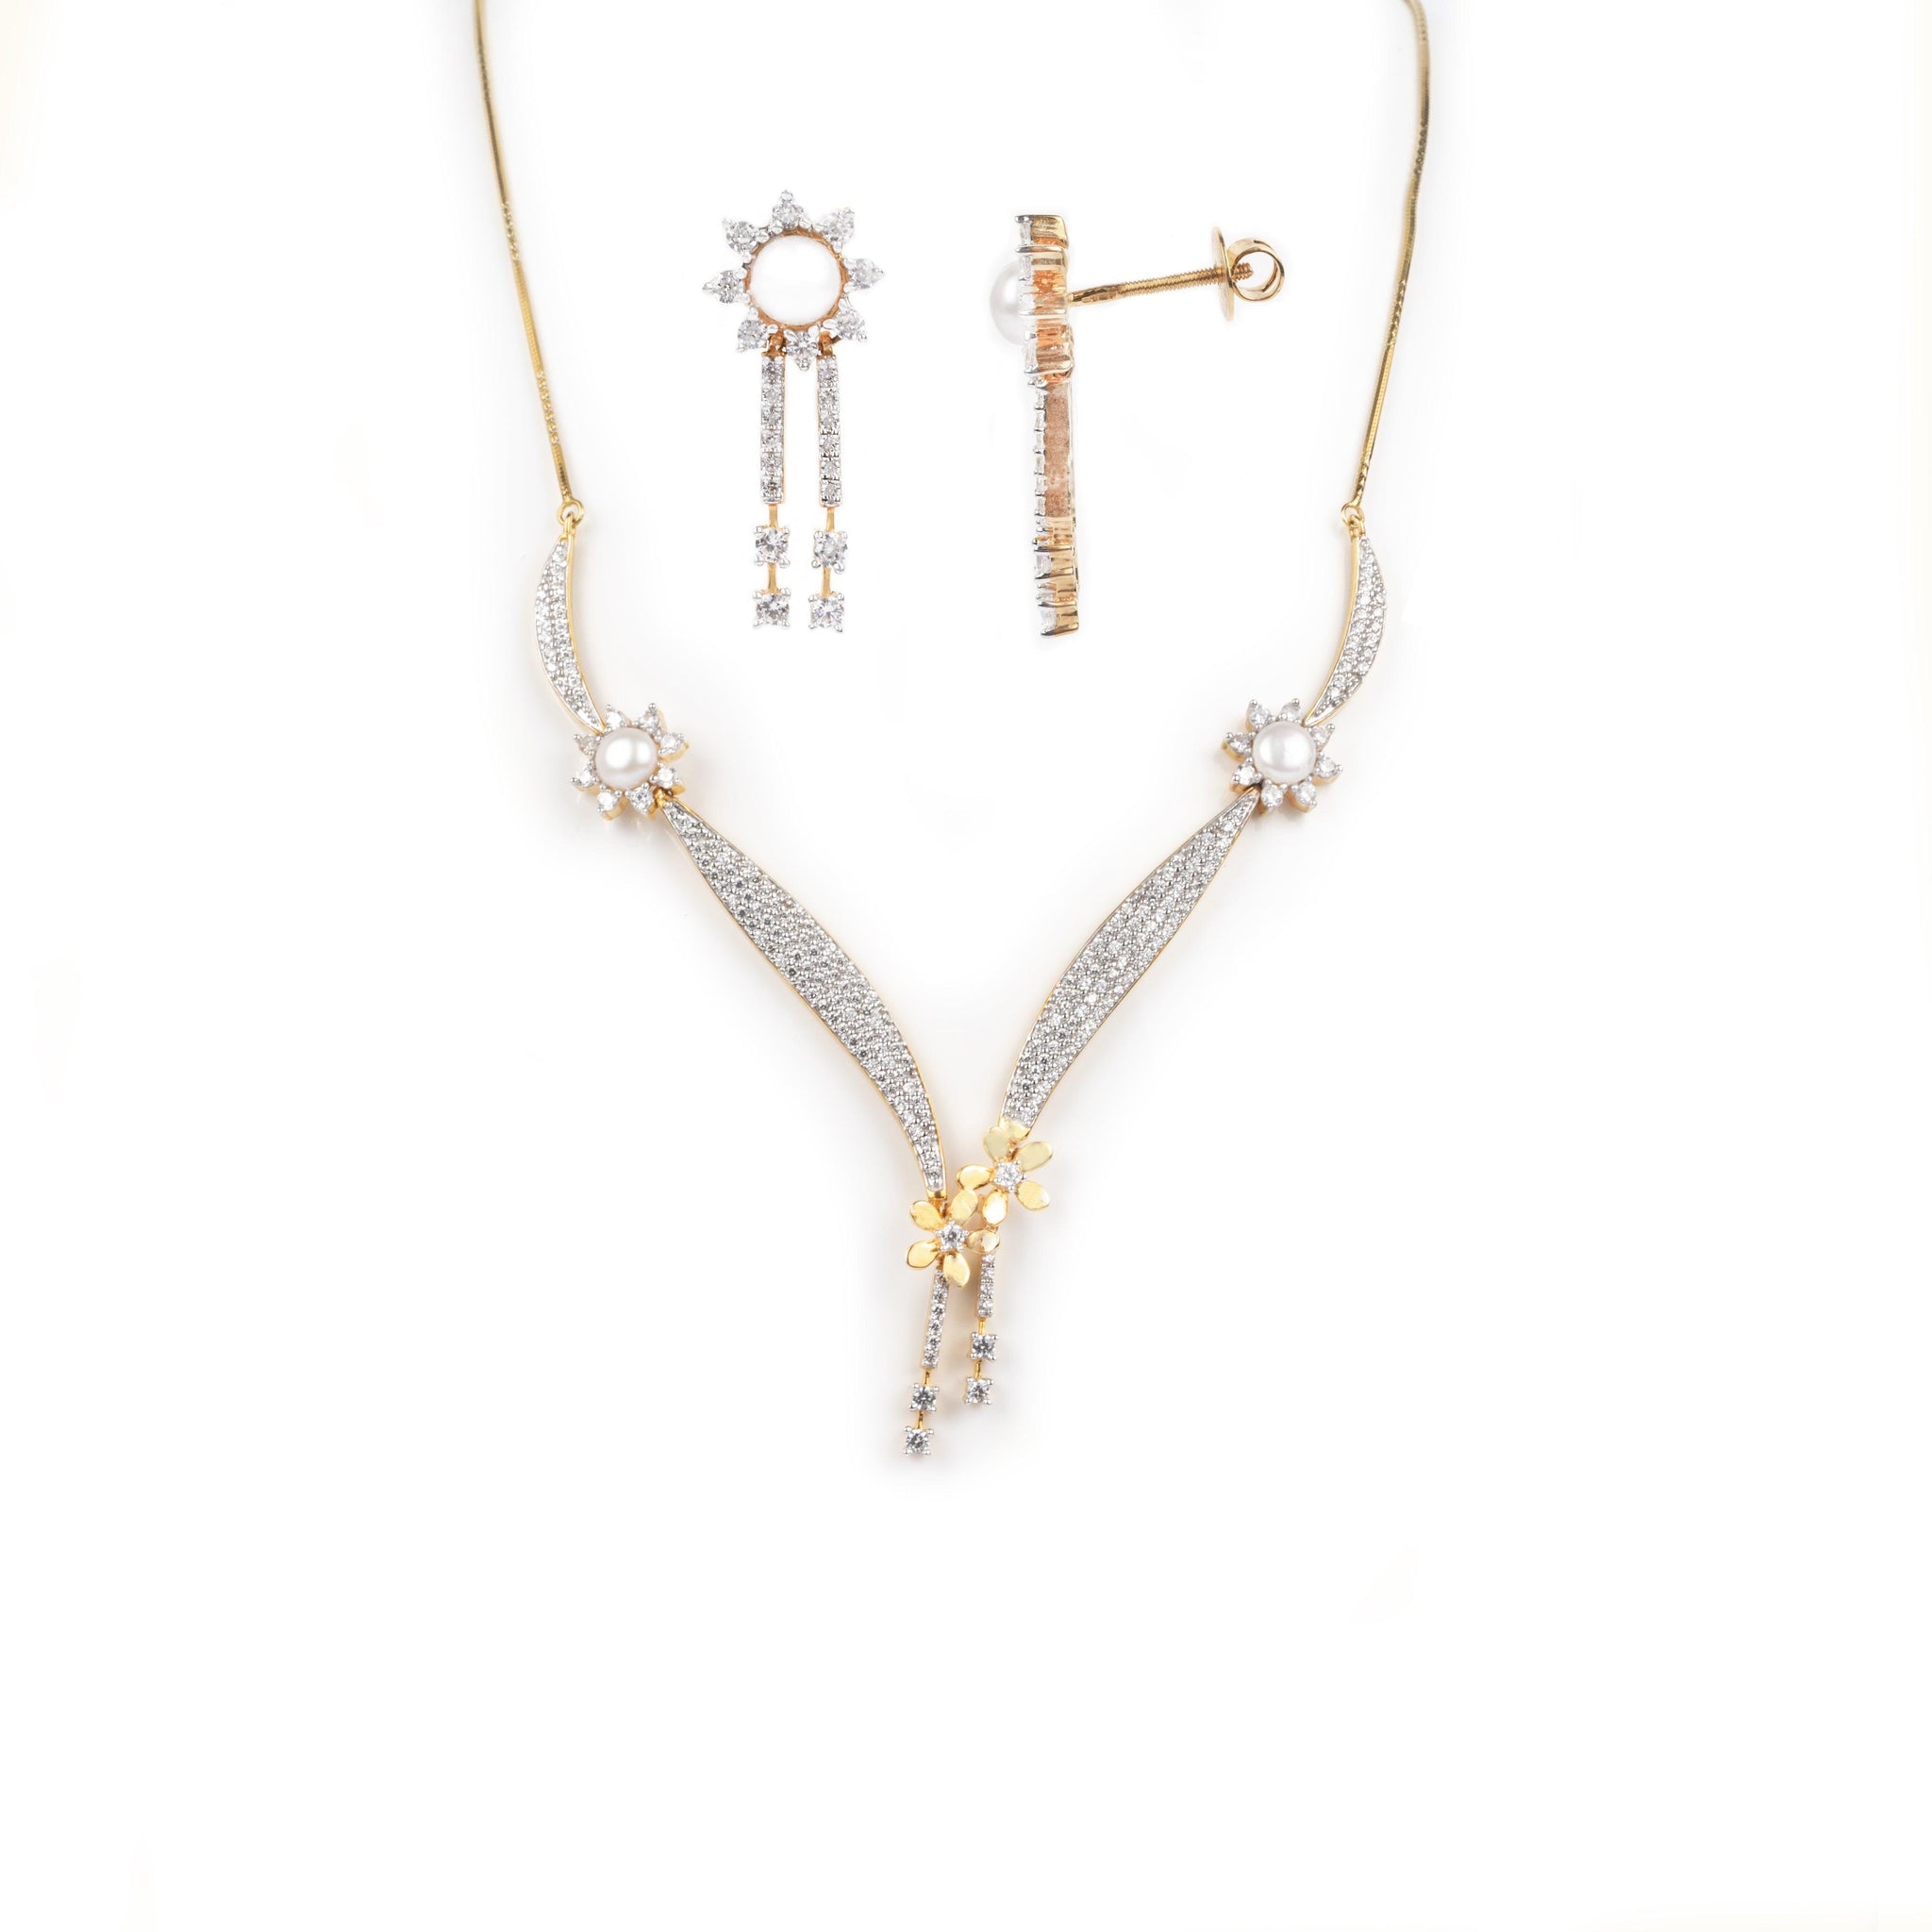 18ct Yellow Gold Necklace and Earrings set with Cubic Zirconia stones and Cultured Pearls (27g) N&E-5531